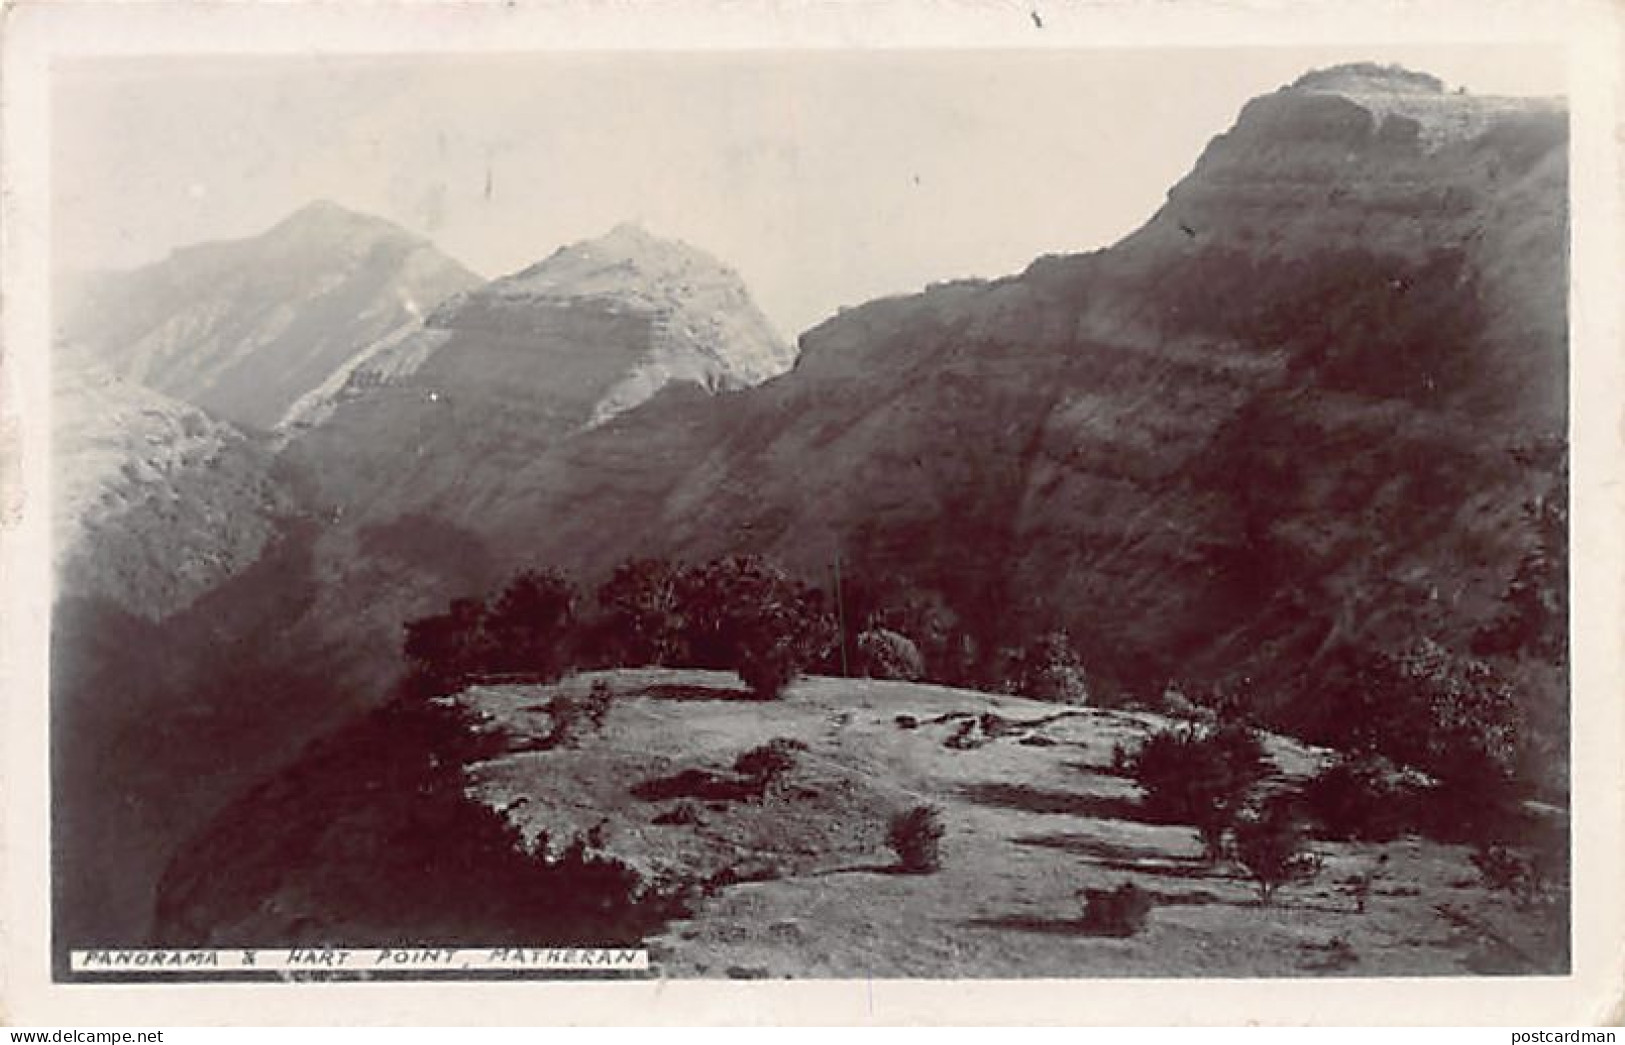 India - MATHERAN - Panorama & Hart Point - REAL PHOTO - Publ. Unknown  - Inde